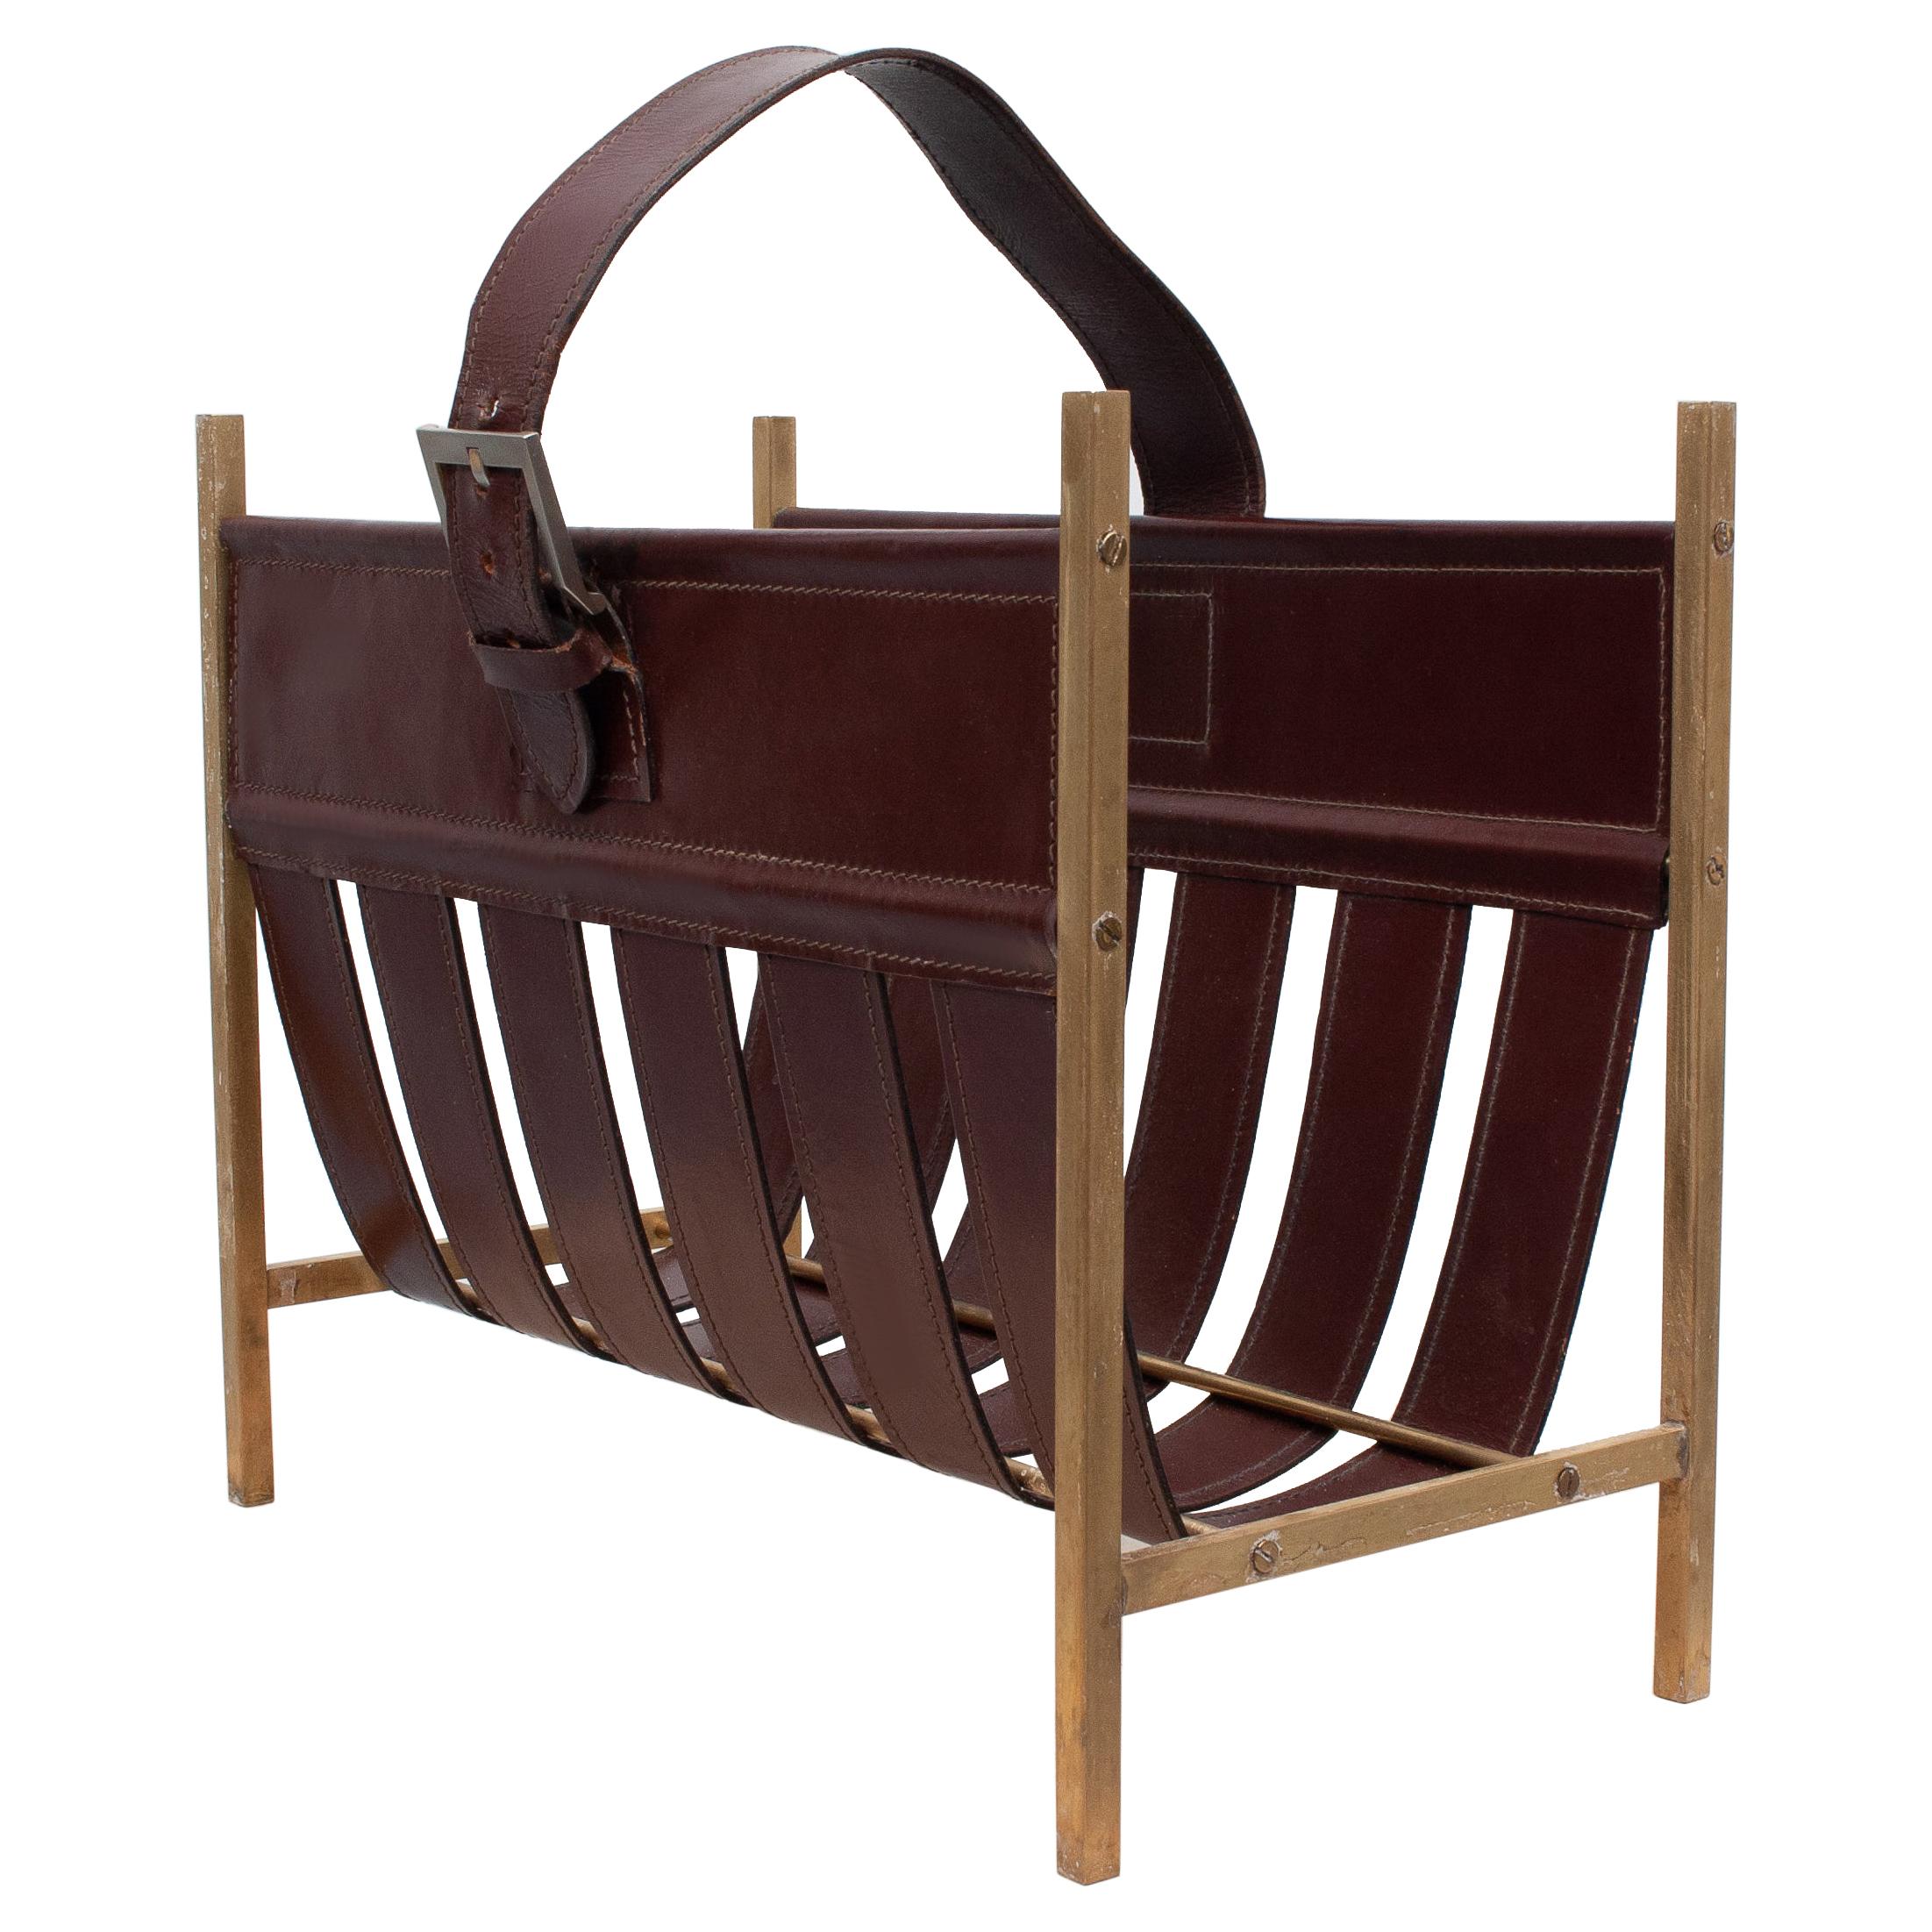 Jacques Adnet, Stich Leather Magazine Rack